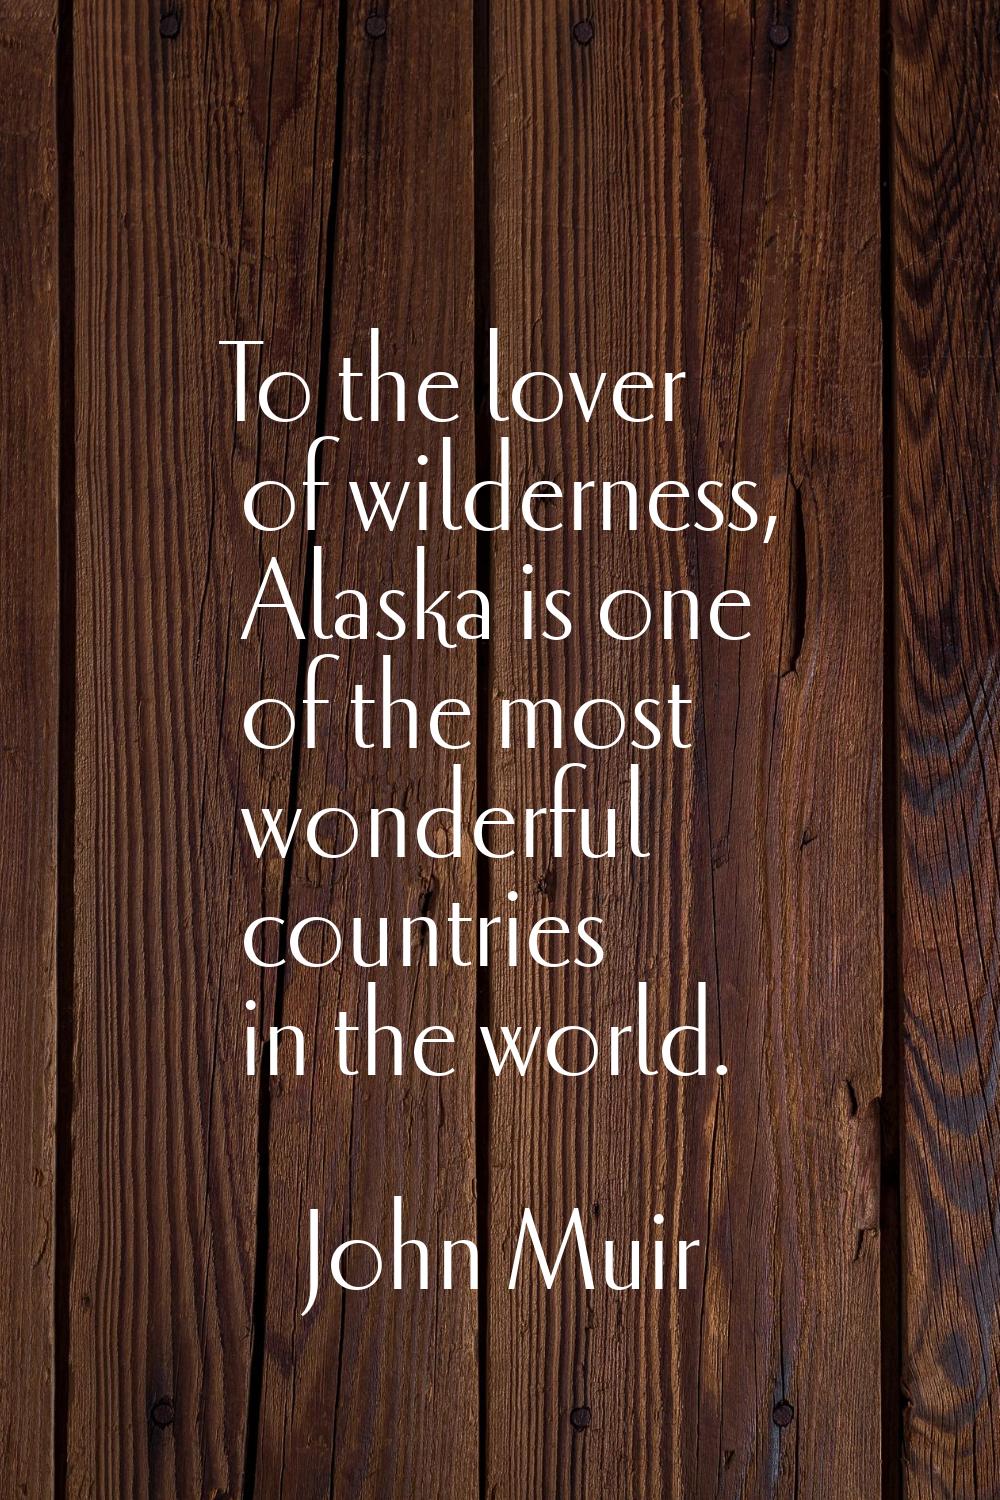 To the lover of wilderness, Alaska is one of the most wonderful countries in the world.